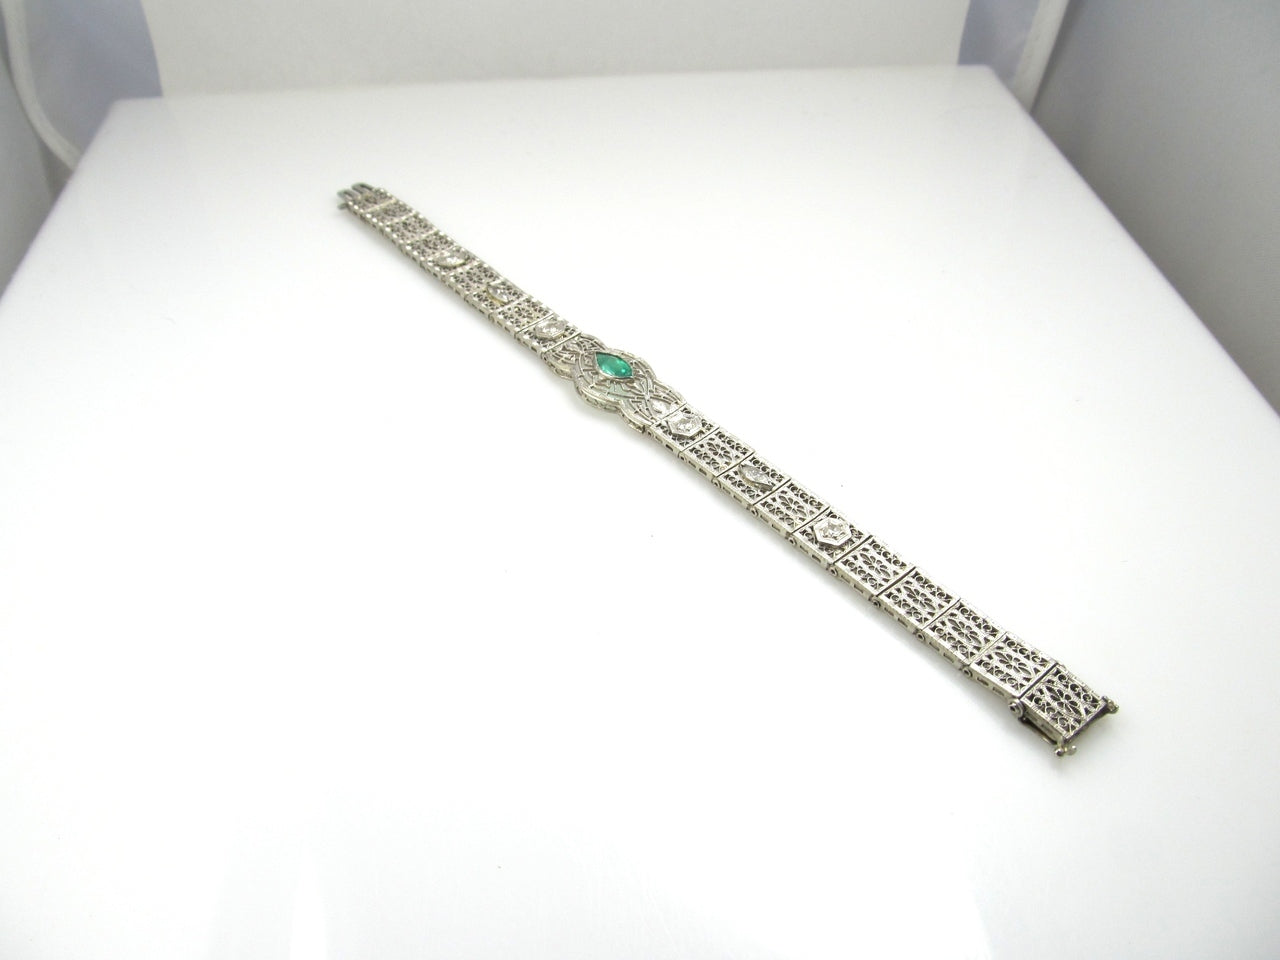 Platinum And 14k Filigree Bracelet With A .80ct Emerald And .70cts In Diamonds, Circa 1920